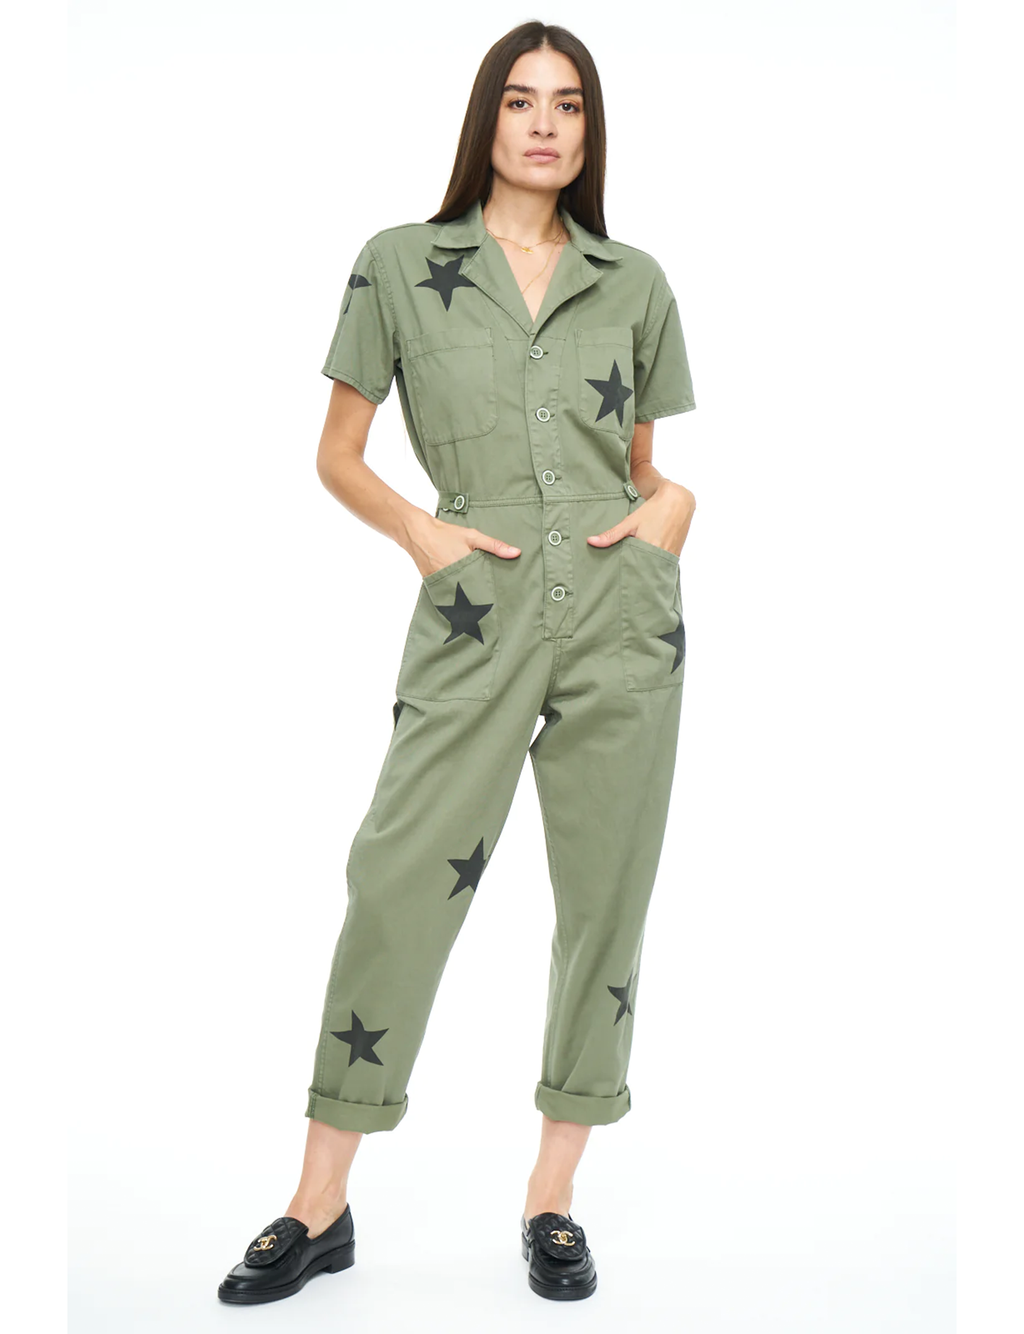 Grover Short Sleeve Field Suit, Royal Honor